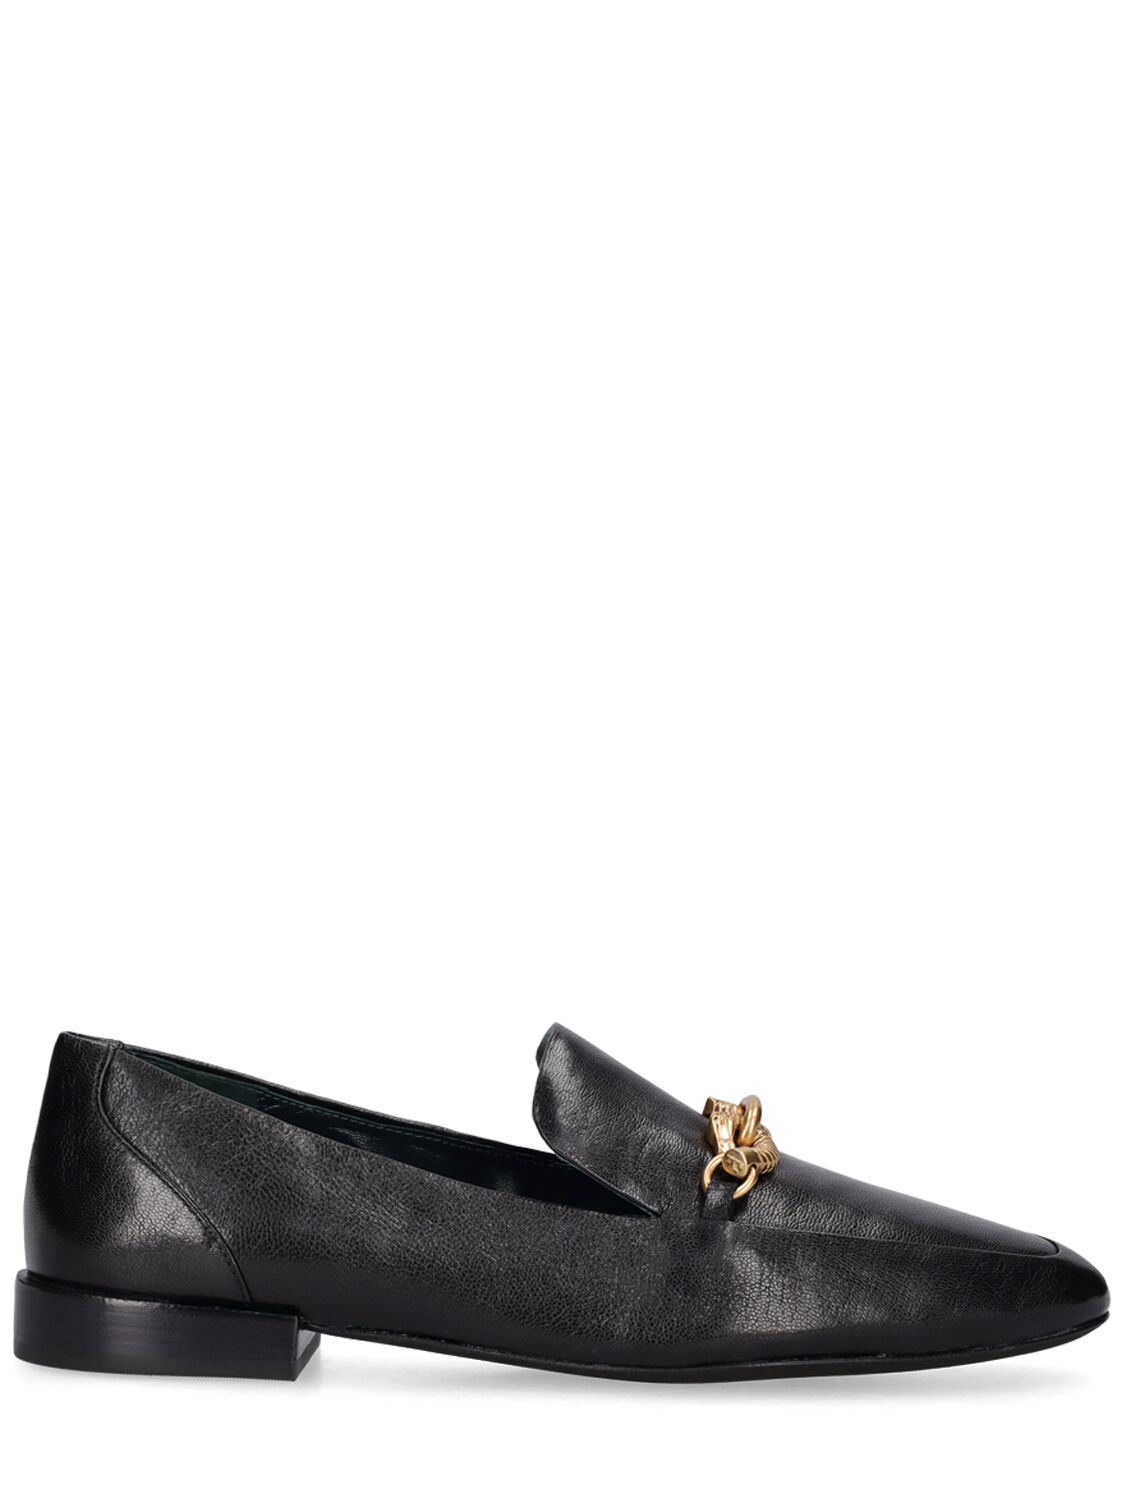 20mm Jessa Patent Leather Loafers